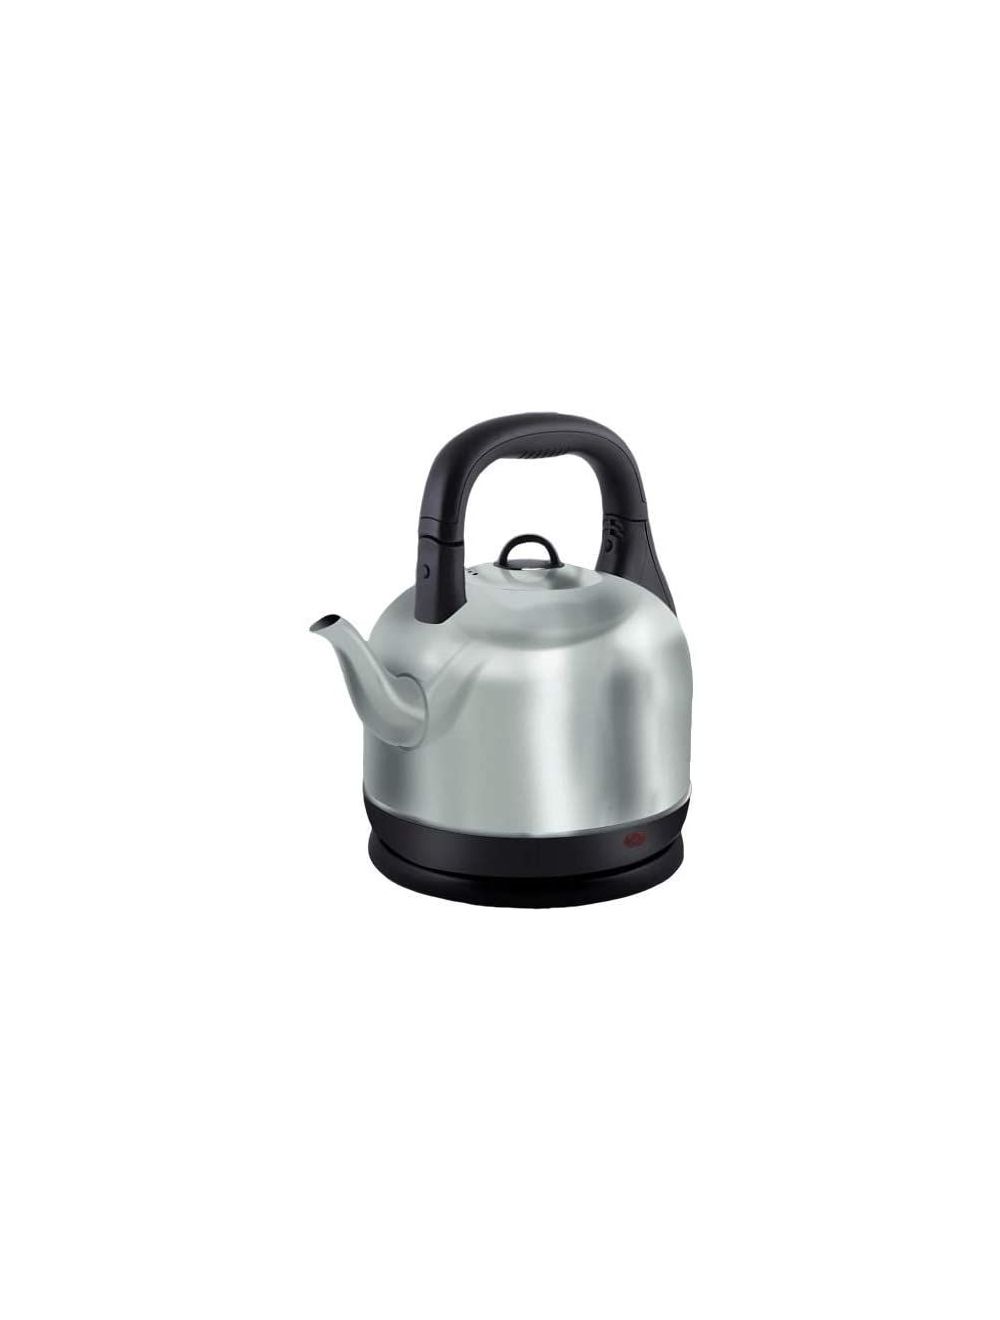 iSONIC Stainless Steel Electric Kettle-iK 514